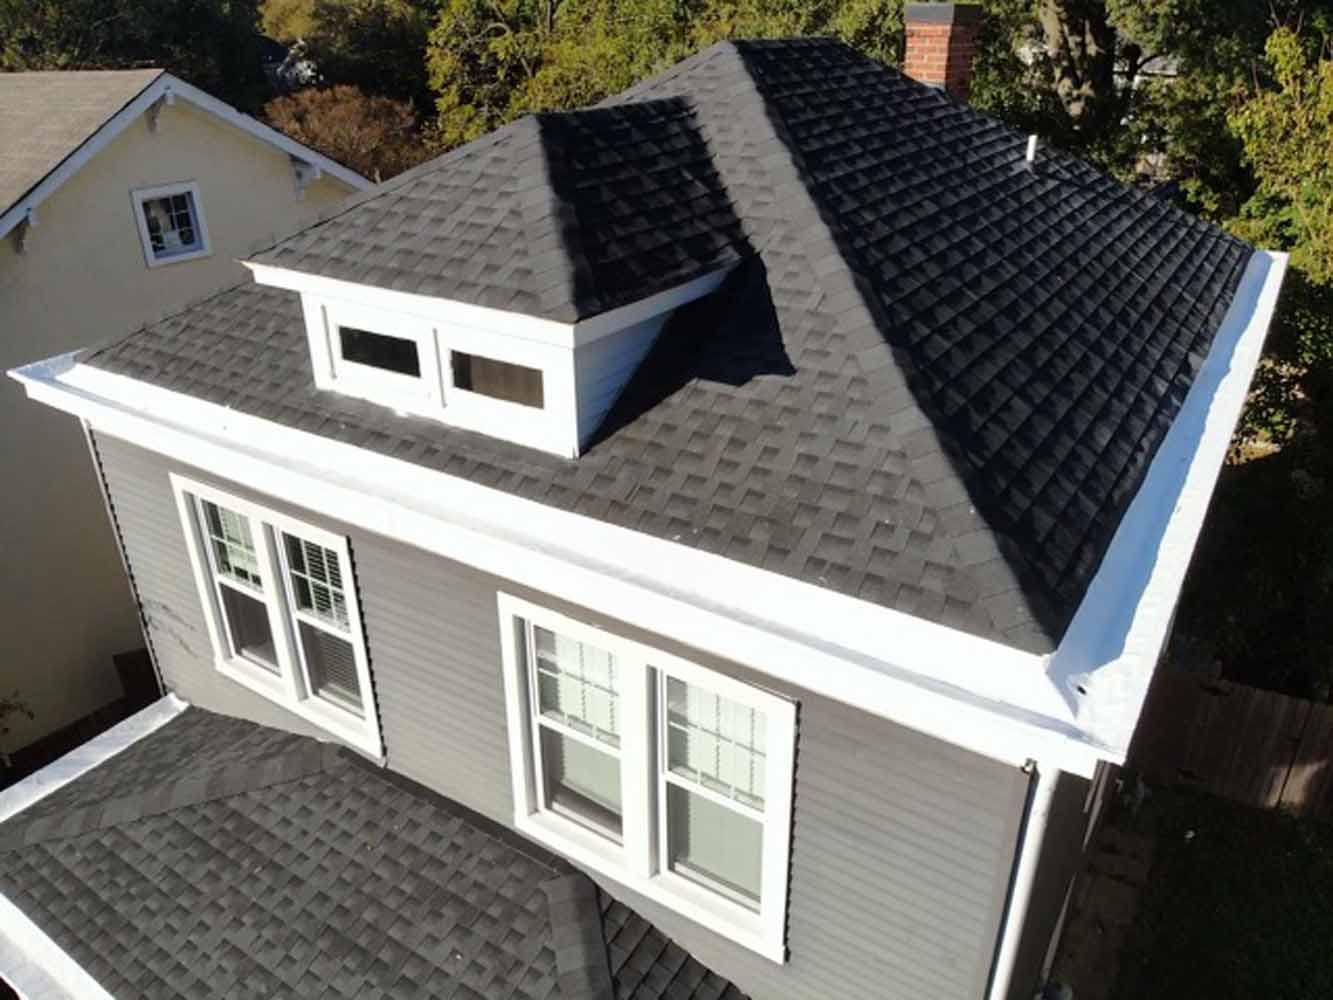 Aerial view of a modern house with dark gray shingles, featuring a prominent dormer window and white trim. 